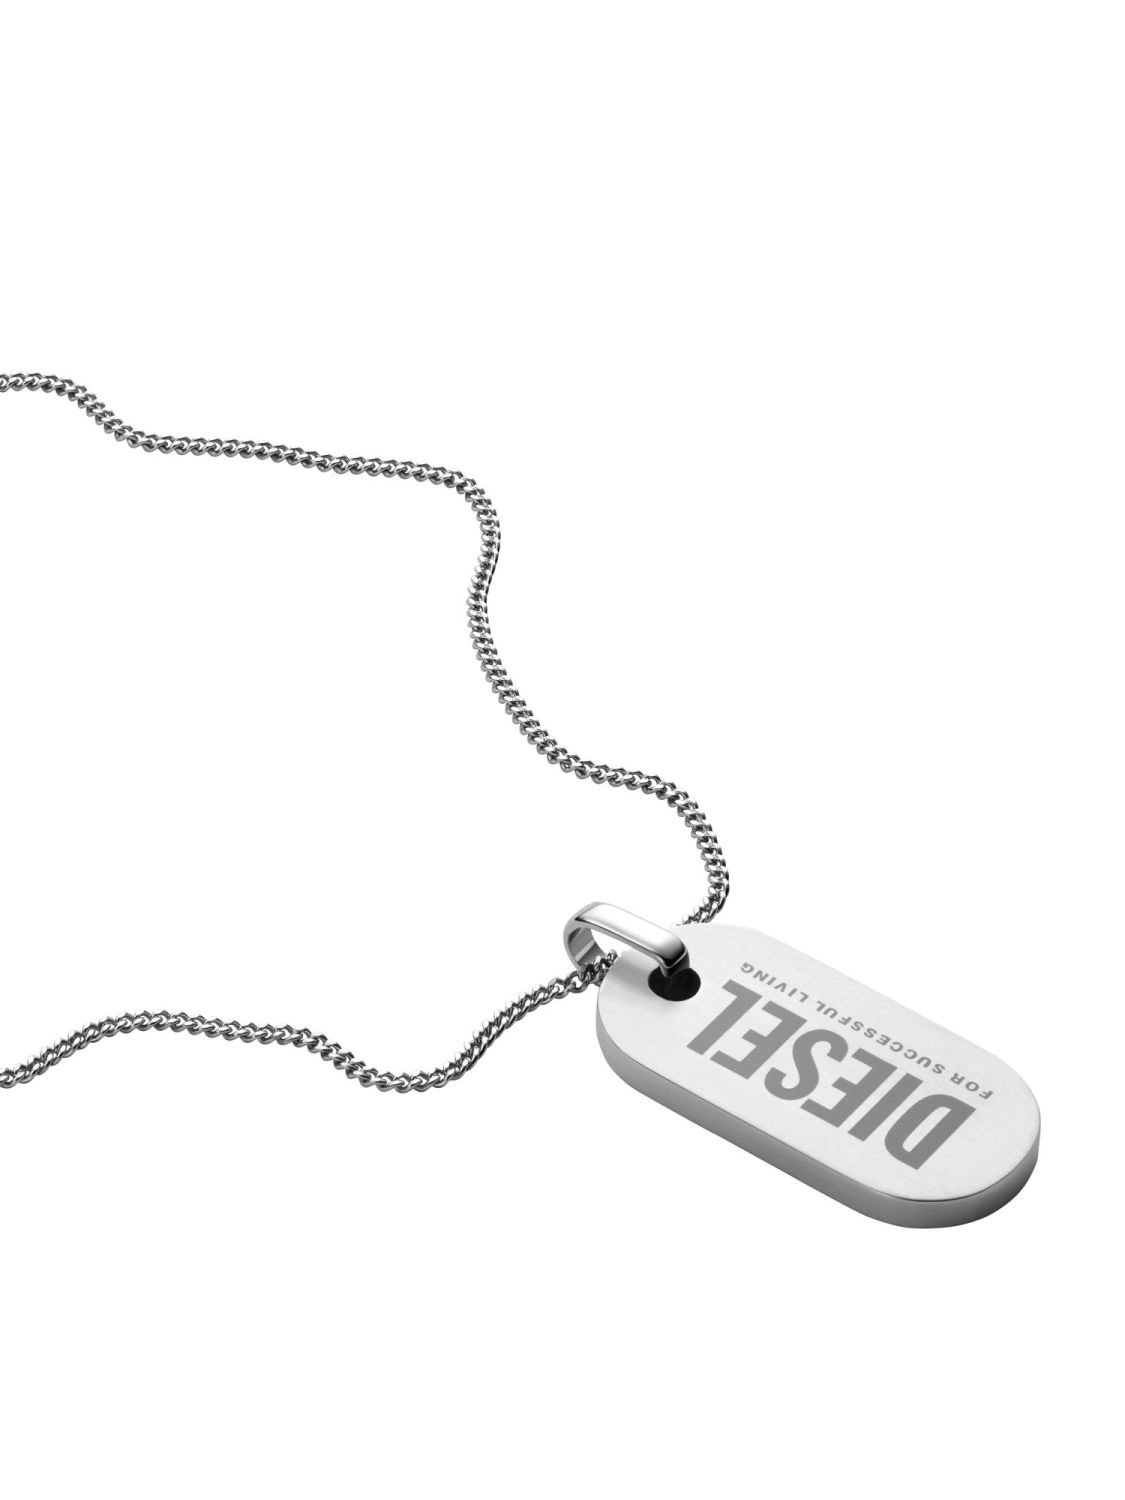 Diesel Men\'s Curb with Tag • Dog Necklace uhrcenter Pendant DX1348040 Chain